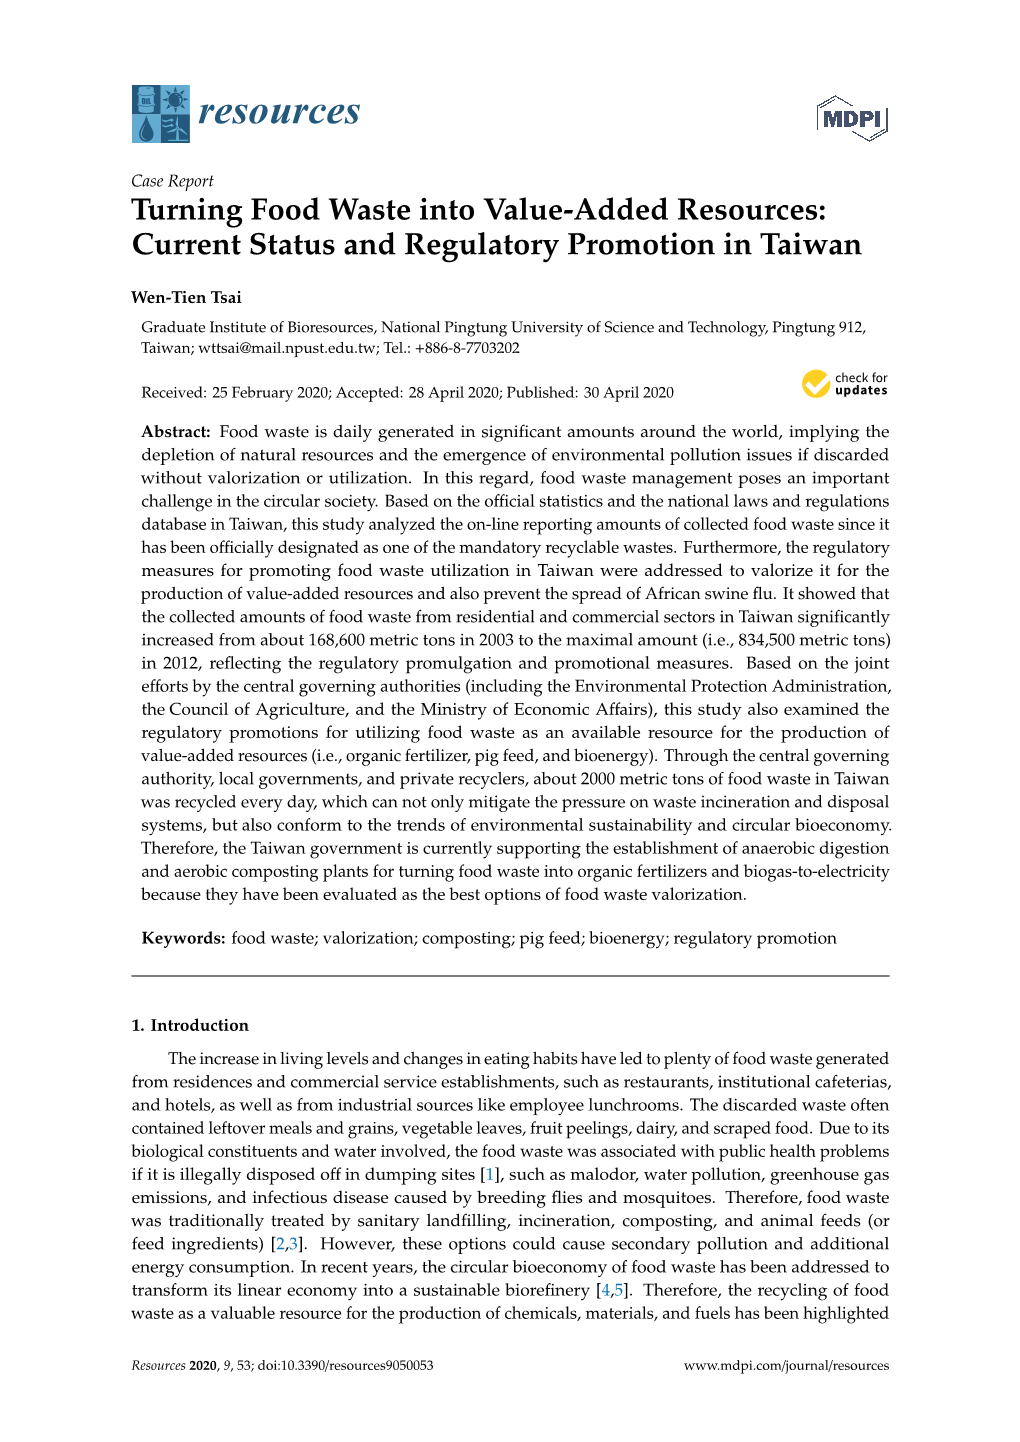 Turning Food Waste Into Value-Added Resources: Current Status and Regulatory Promotion in Taiwan